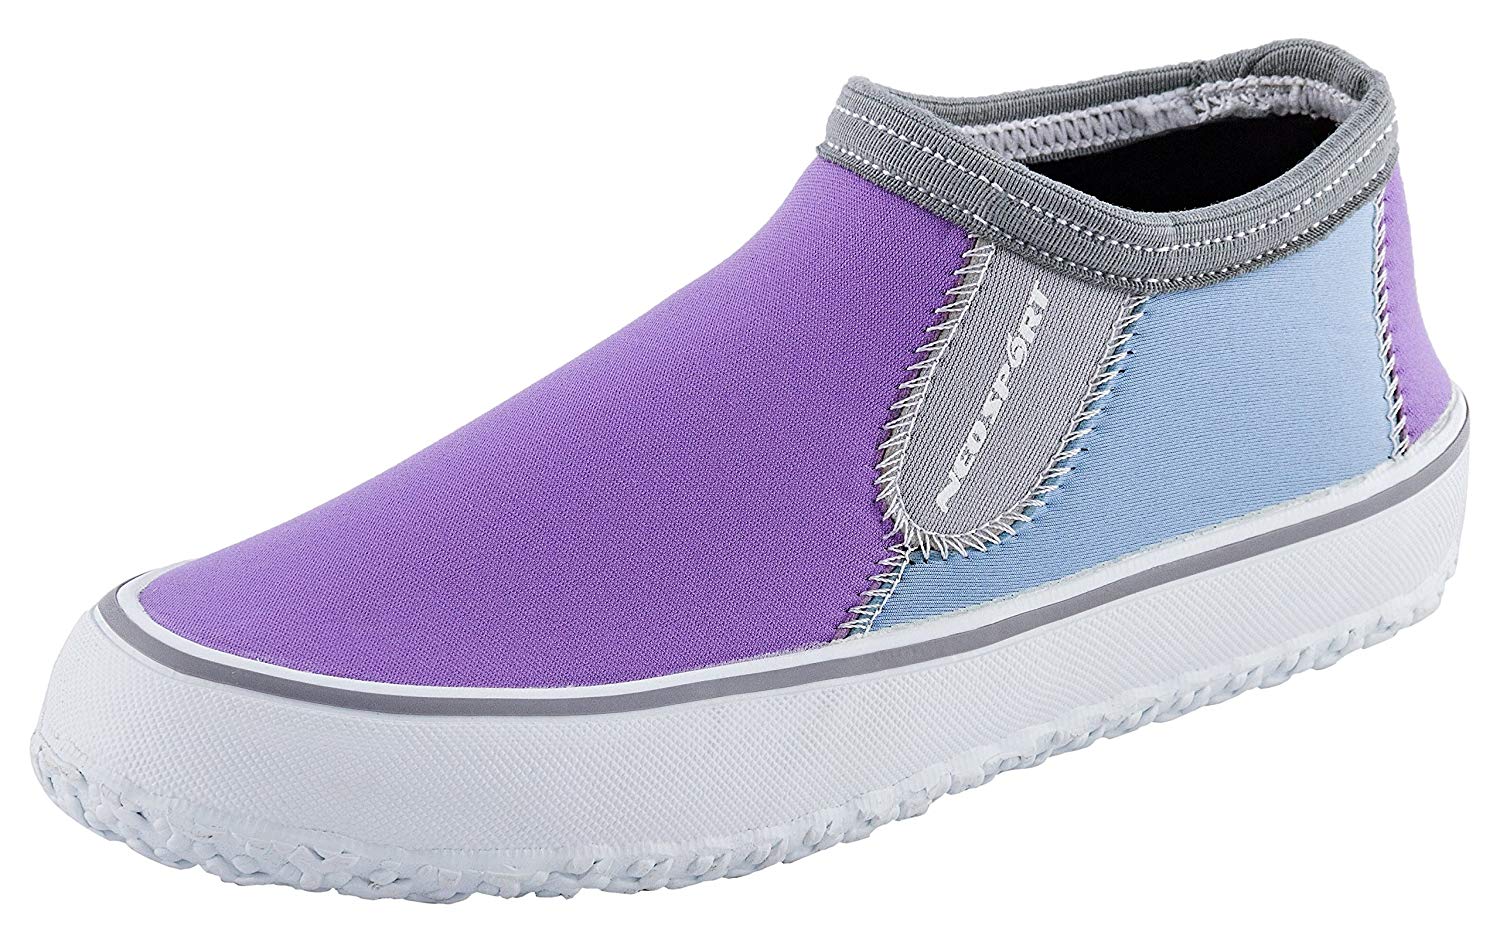 NeoSport Women's Water Shoes - Lilac 